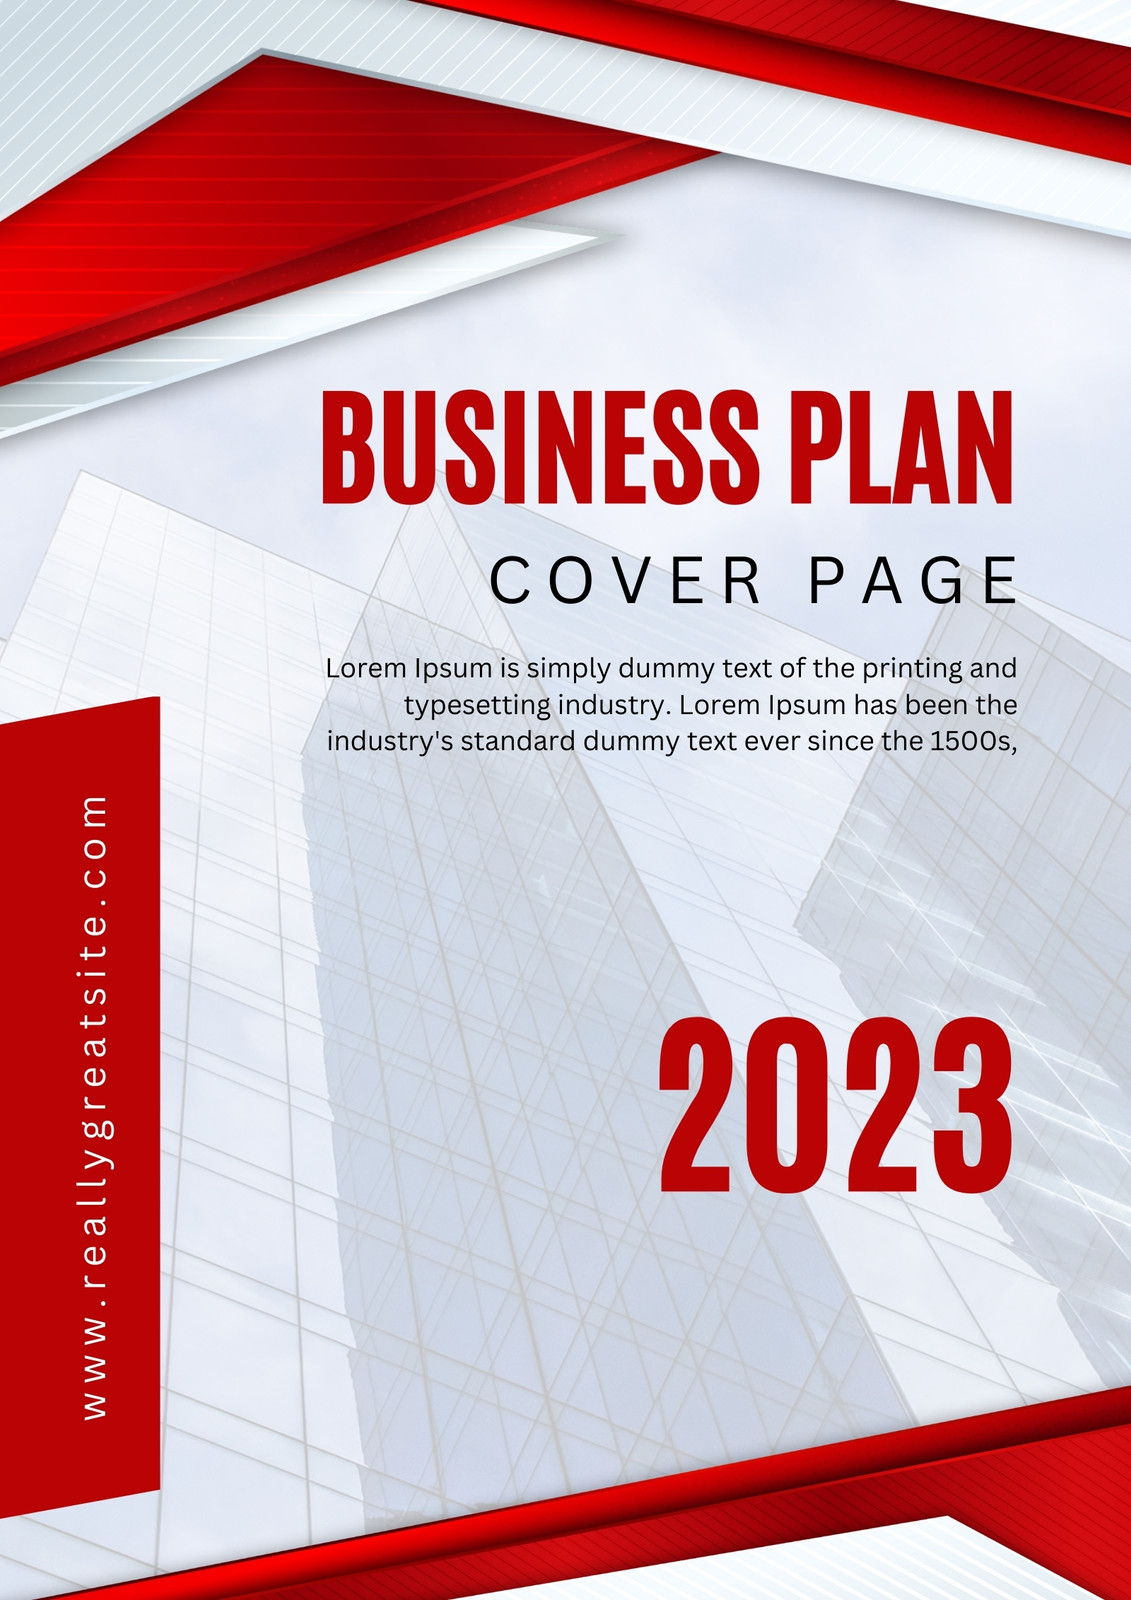 Canva White And Red Modern Business Plan Cover Page GCClVf2ouqM 